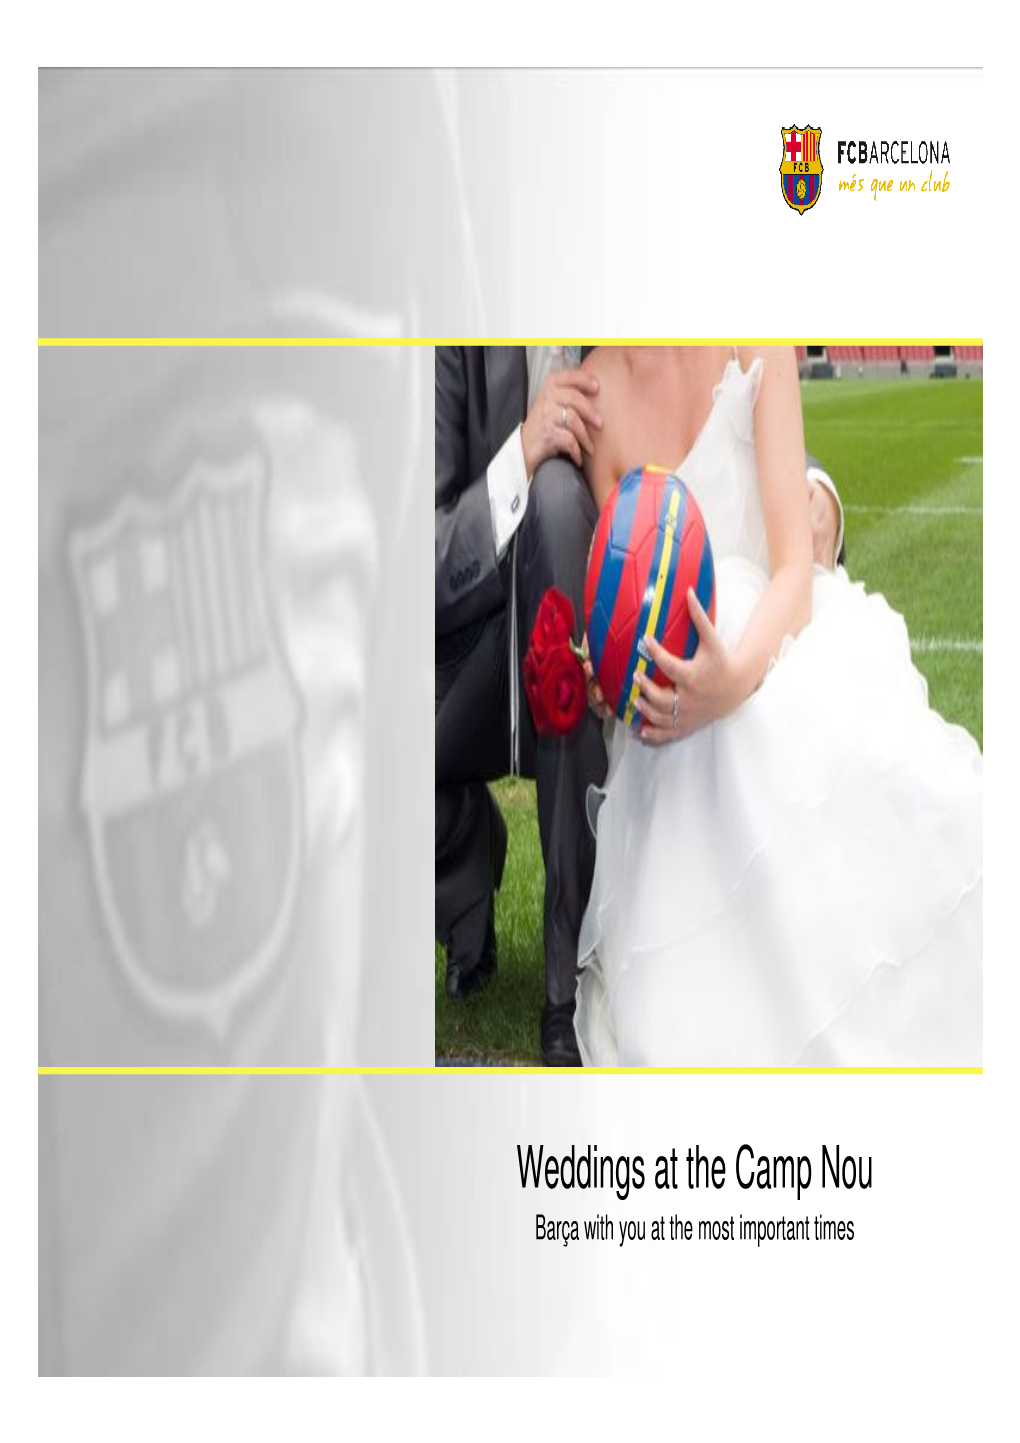 Weddings at the Camp Nou Barça with You at the Most Important Times Welcome to the Camp Nou